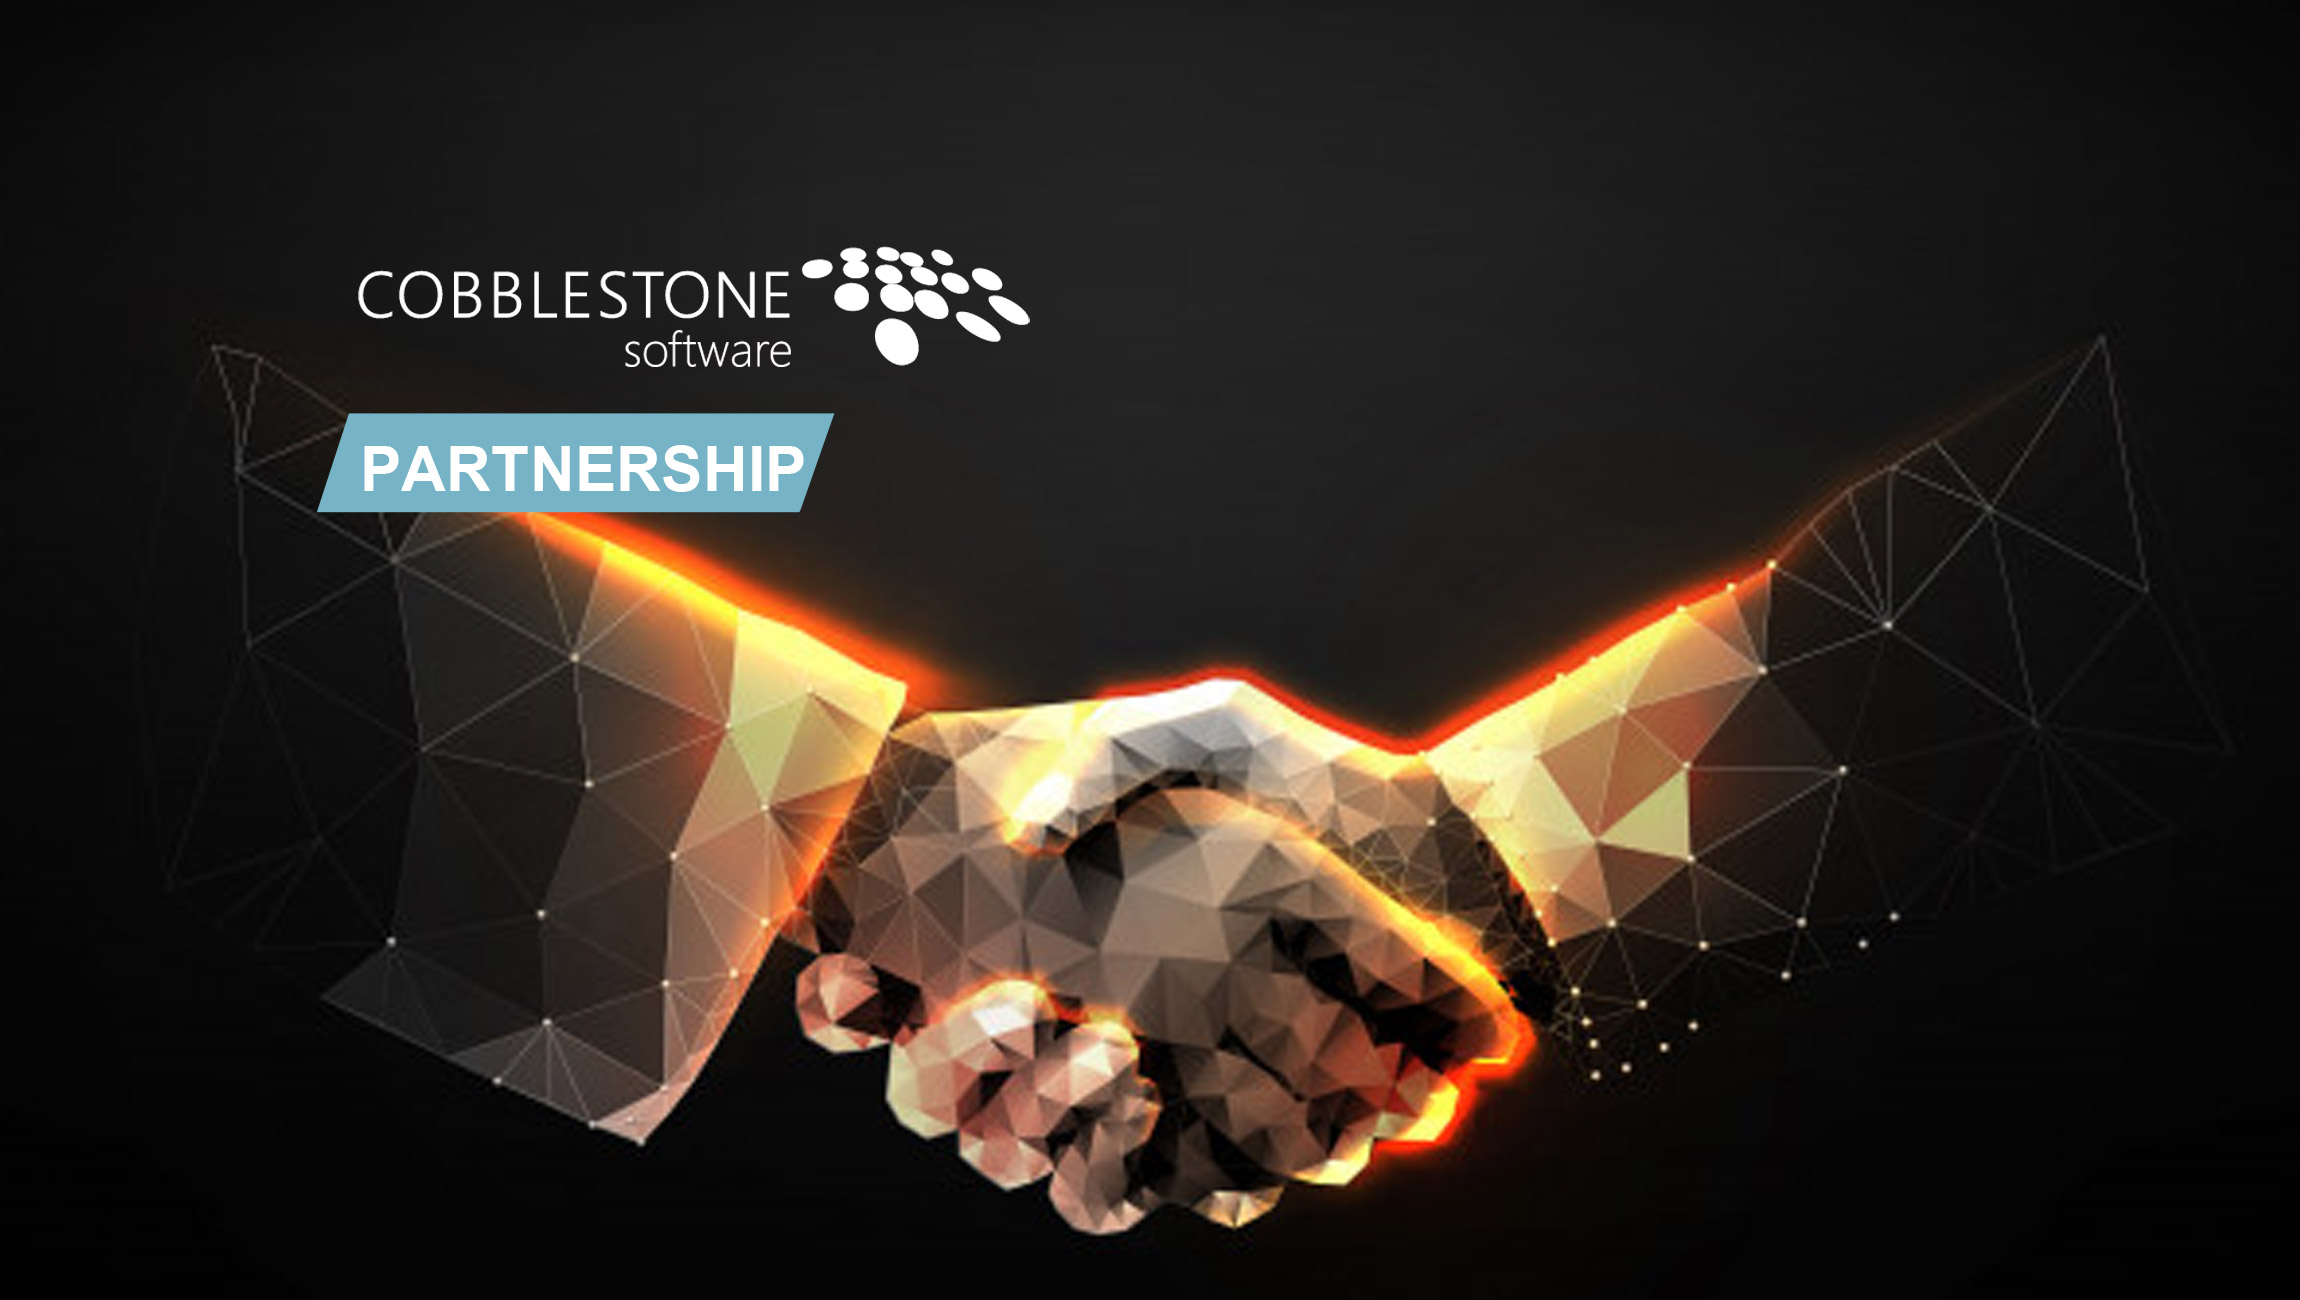 CobbleStone Announces Services Partnership With Koho Software, Inc. To Expand CLM Offering